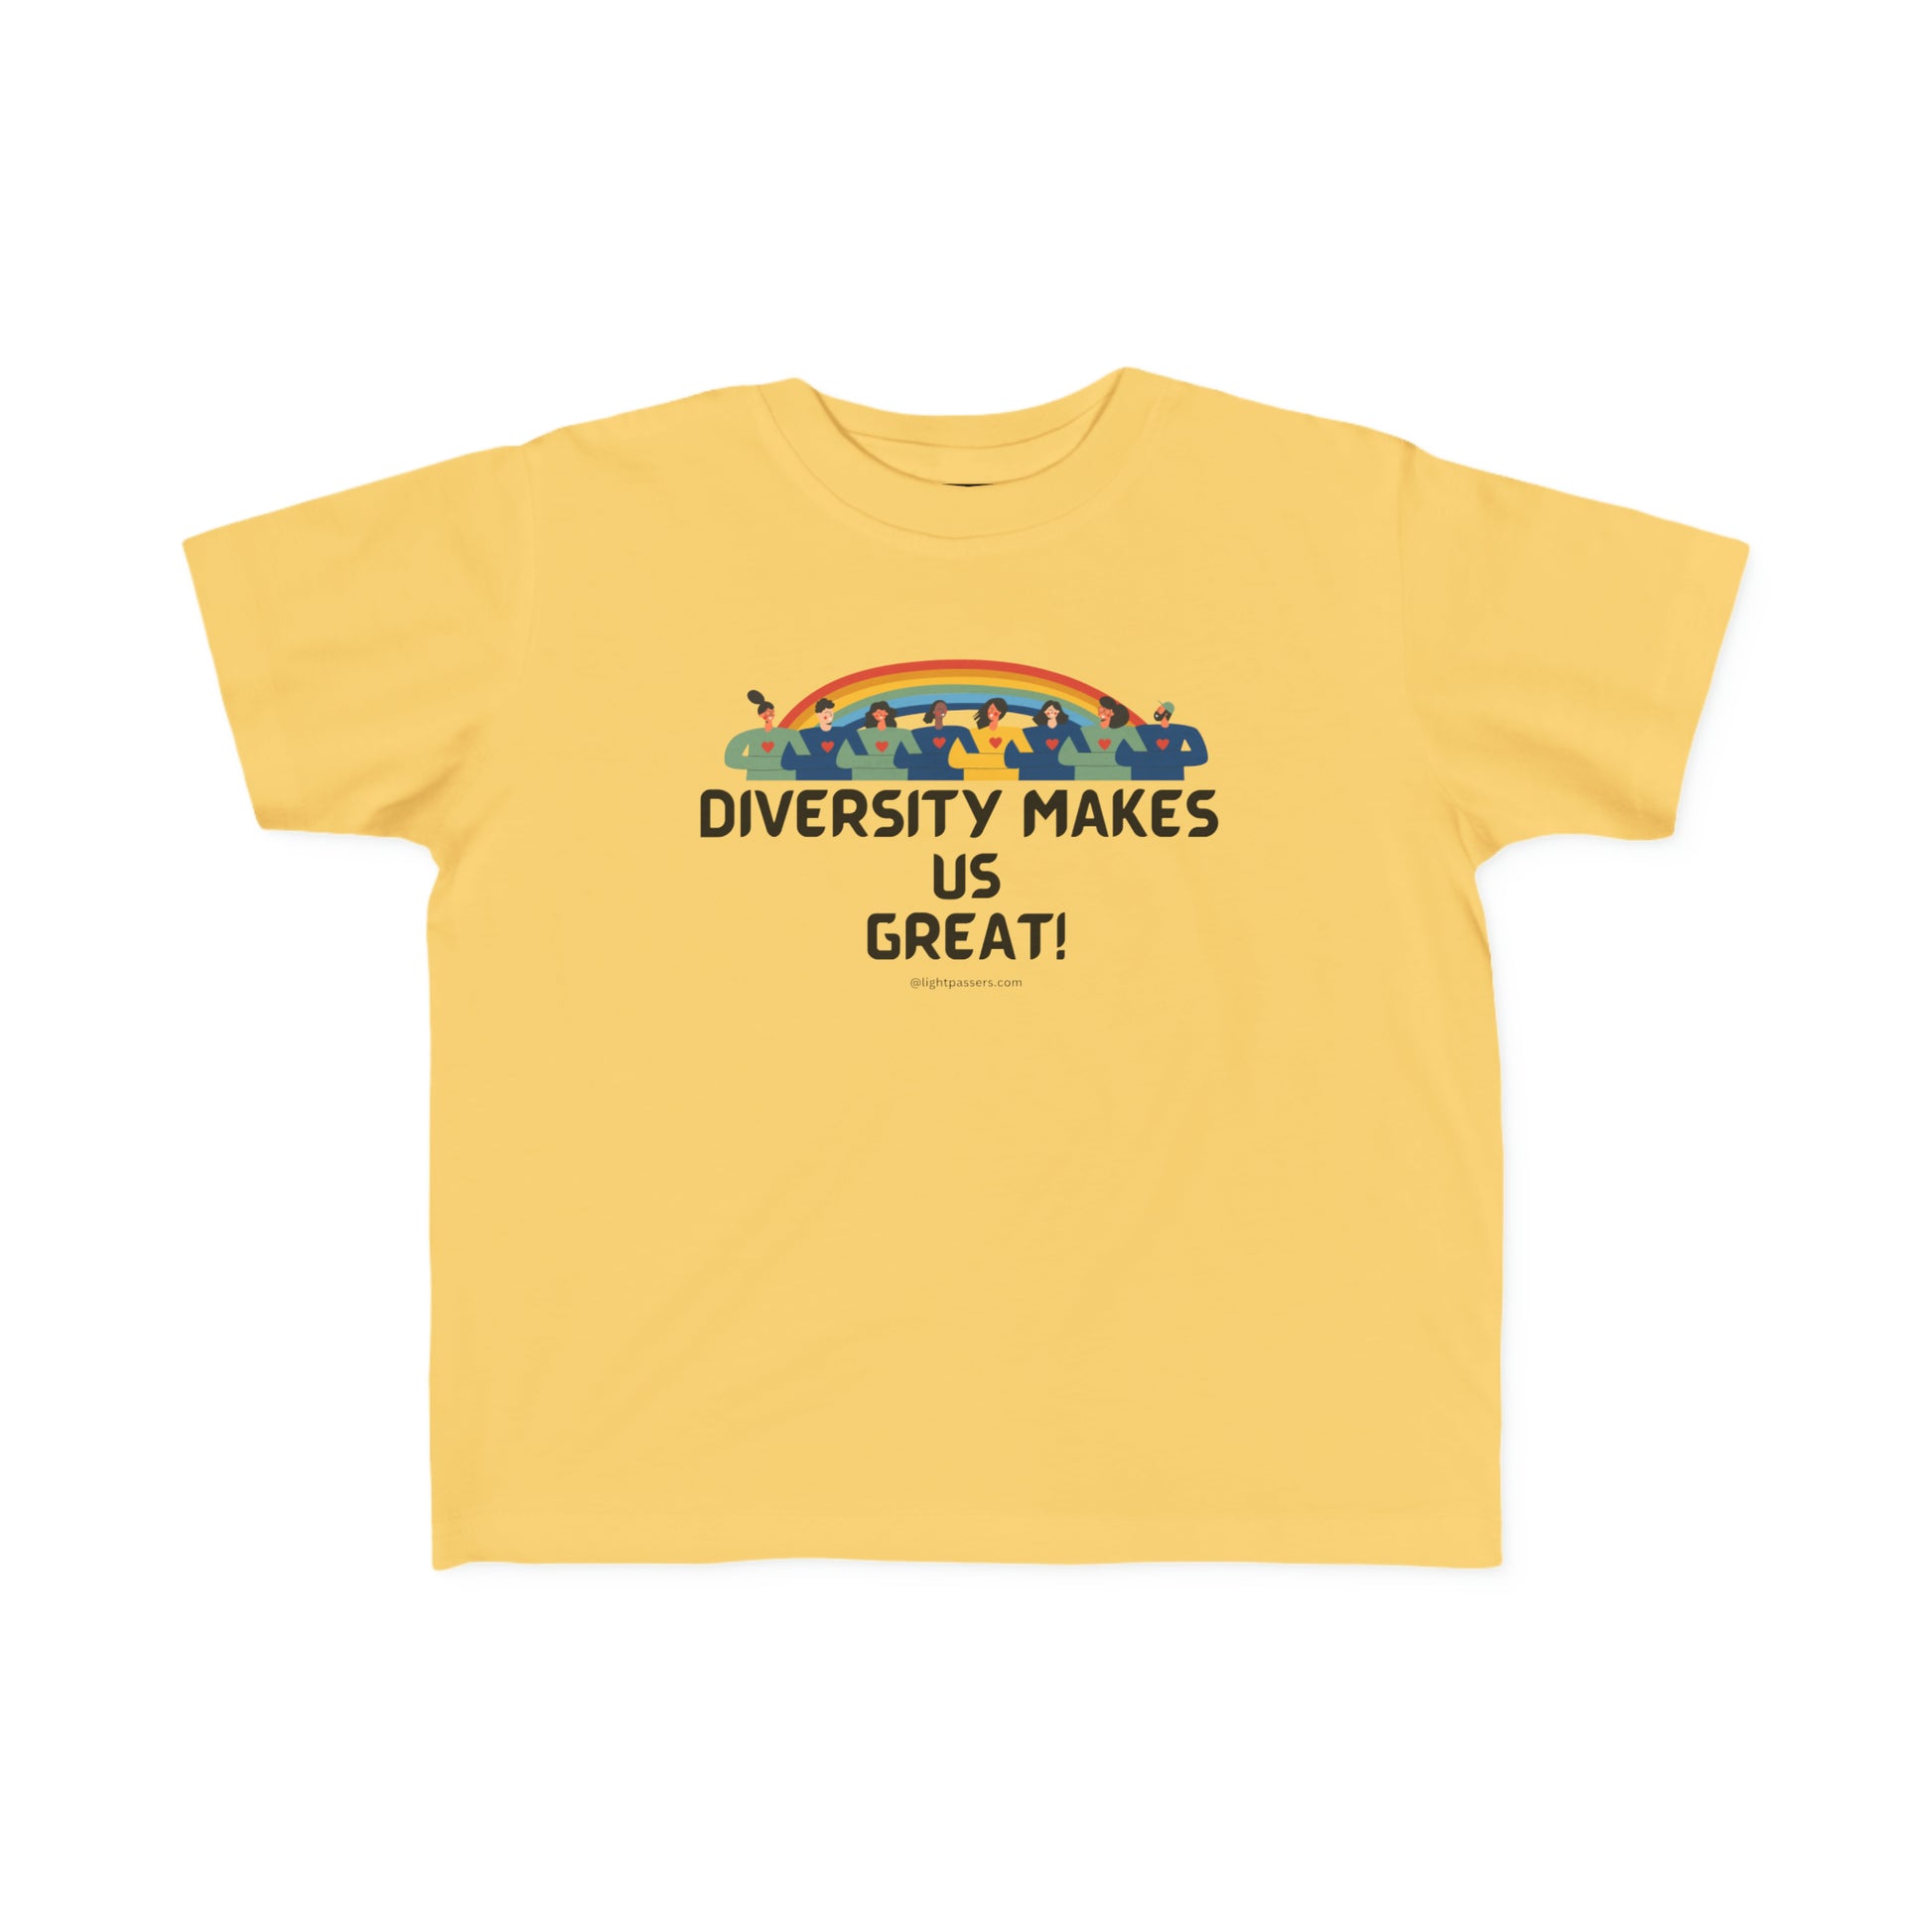 A yellow toddler t-shirt with black text, featuring a group of people. Soft, 100% combed cotton, durable print, tear-away label, classic fit. Ideal for sensitive skin, first adventures.